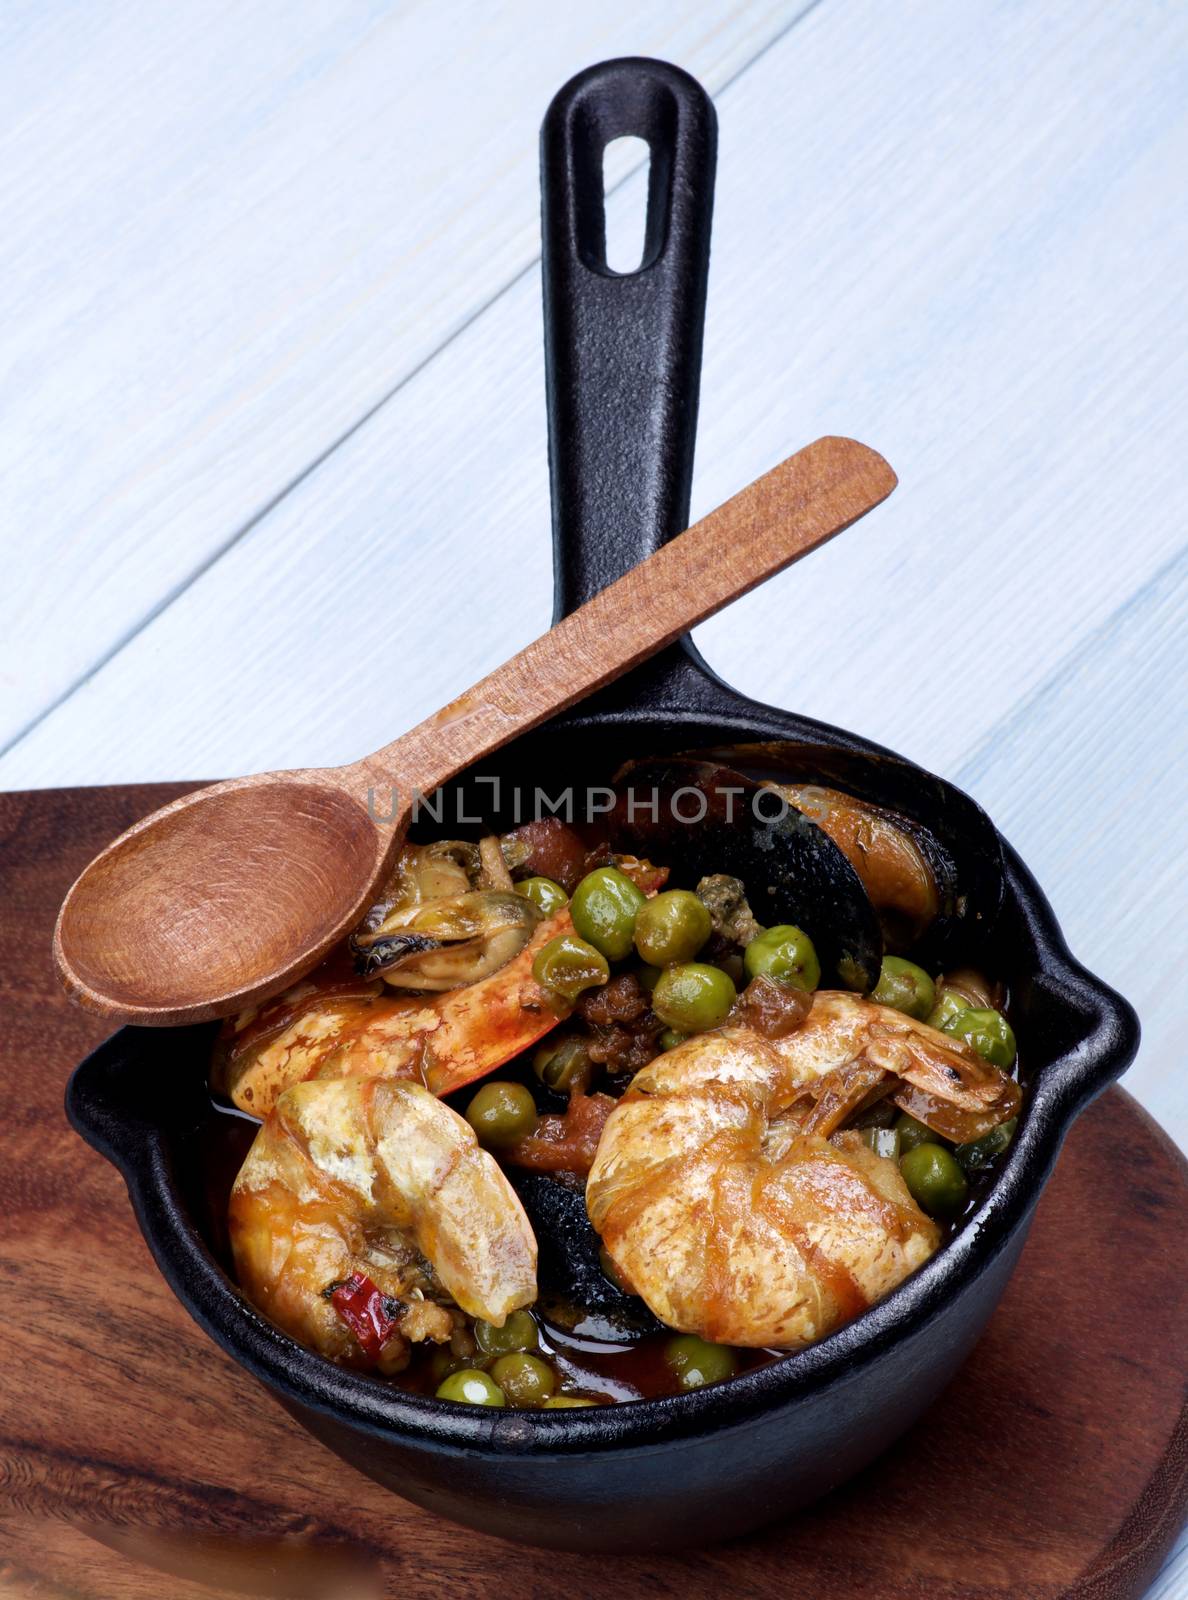 Delicious Seafood Curry with Prawns, Mussels, White Fish and Vegetables in Black Iron Cast Pot with Wooden Spoon closeup on Light Blue background